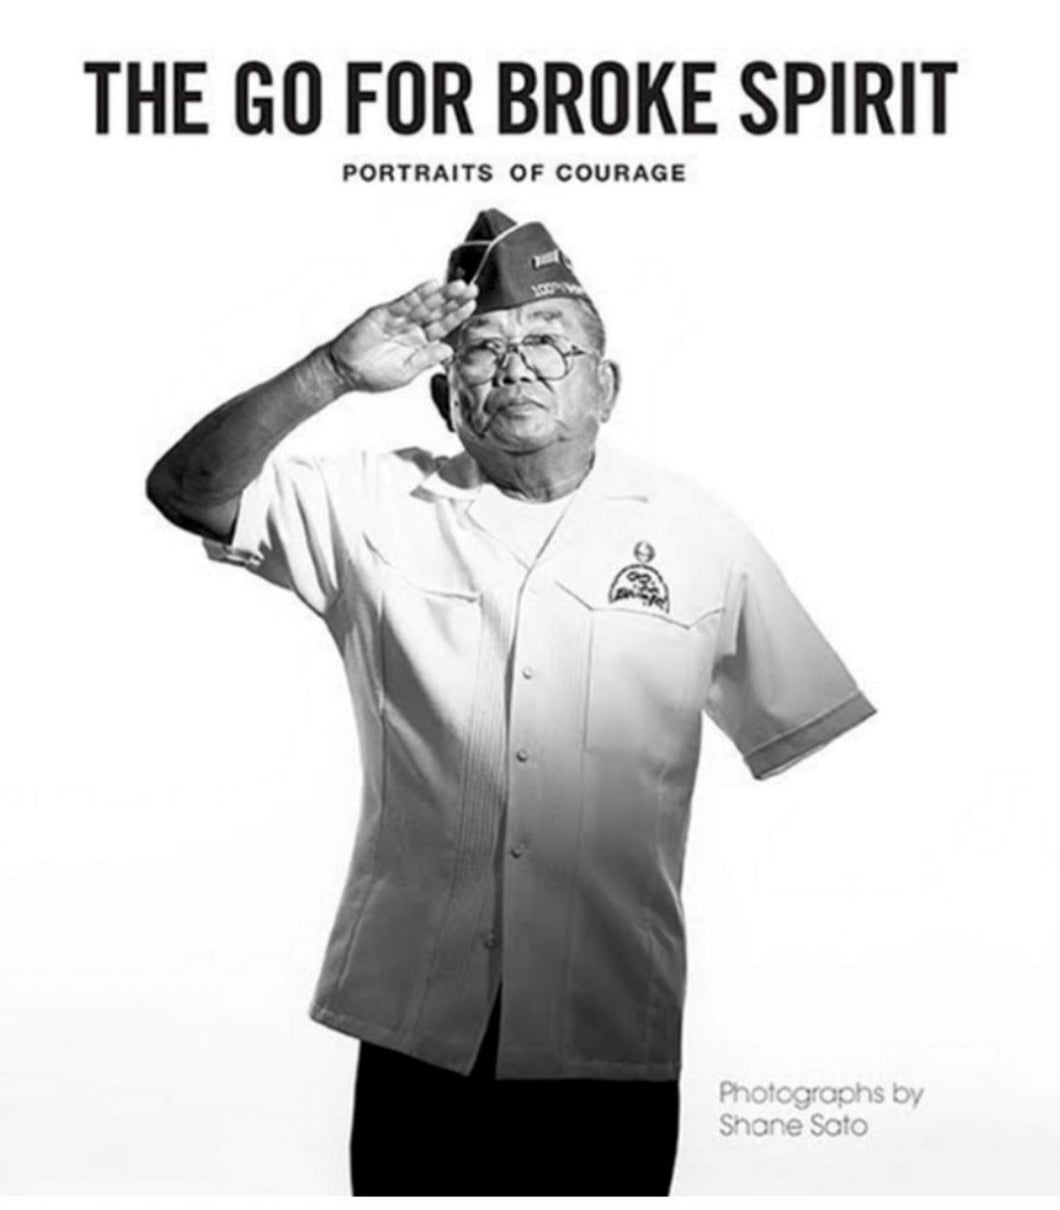 The Go For Broke Spirit: Portraits of Courage by Shane Sato